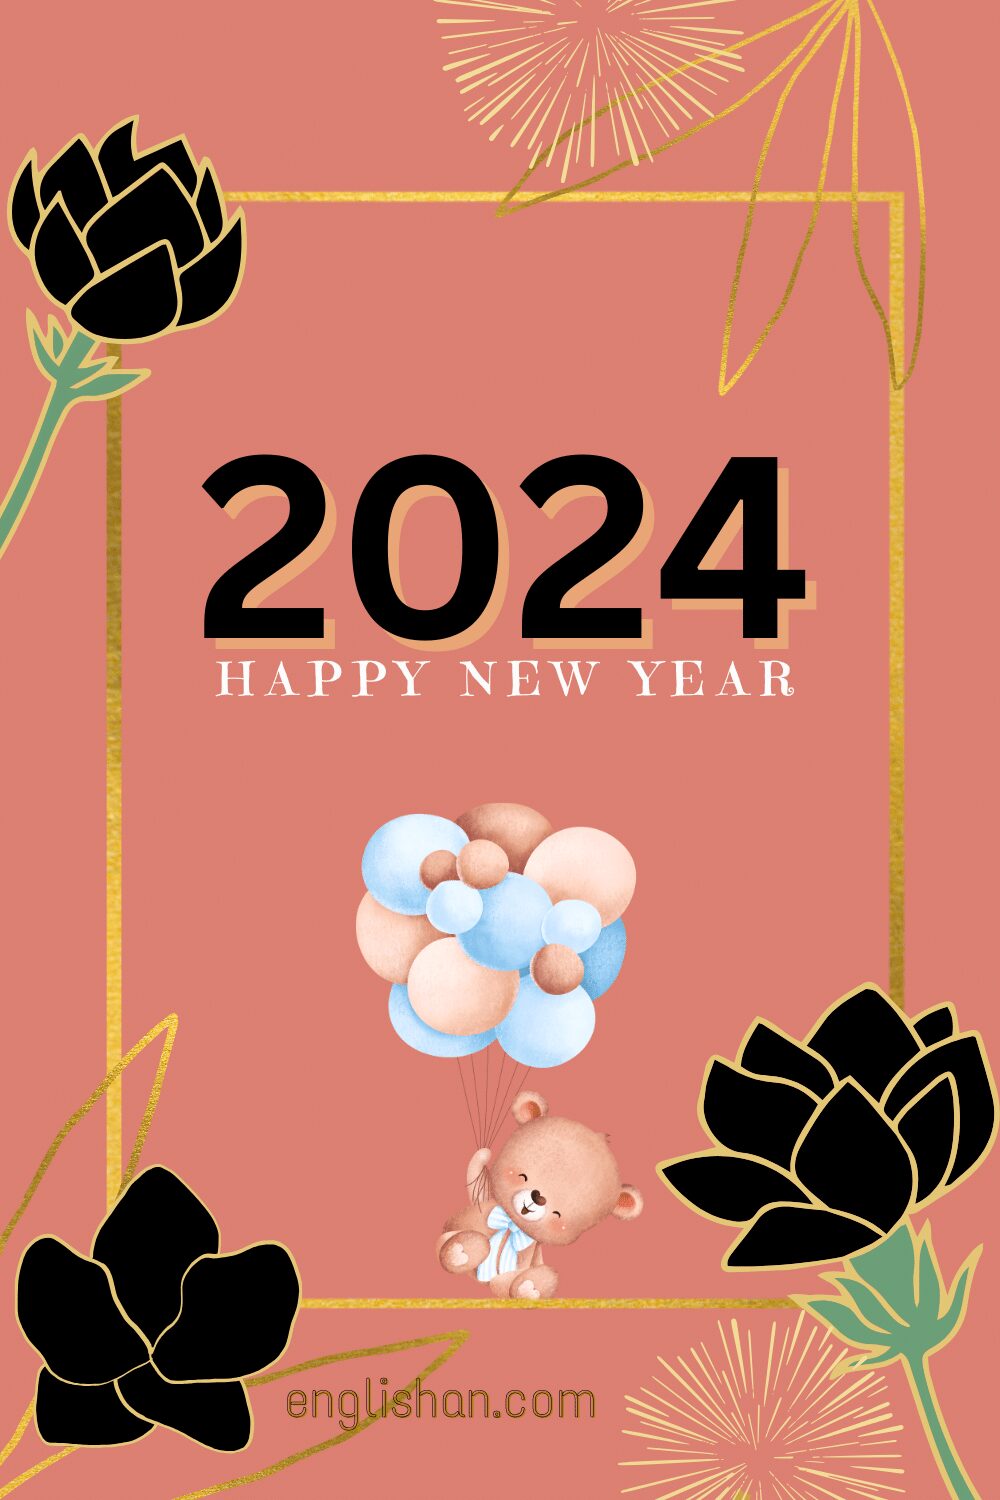 Spread Smiles with Happy New Year 2024 Image Collection Free